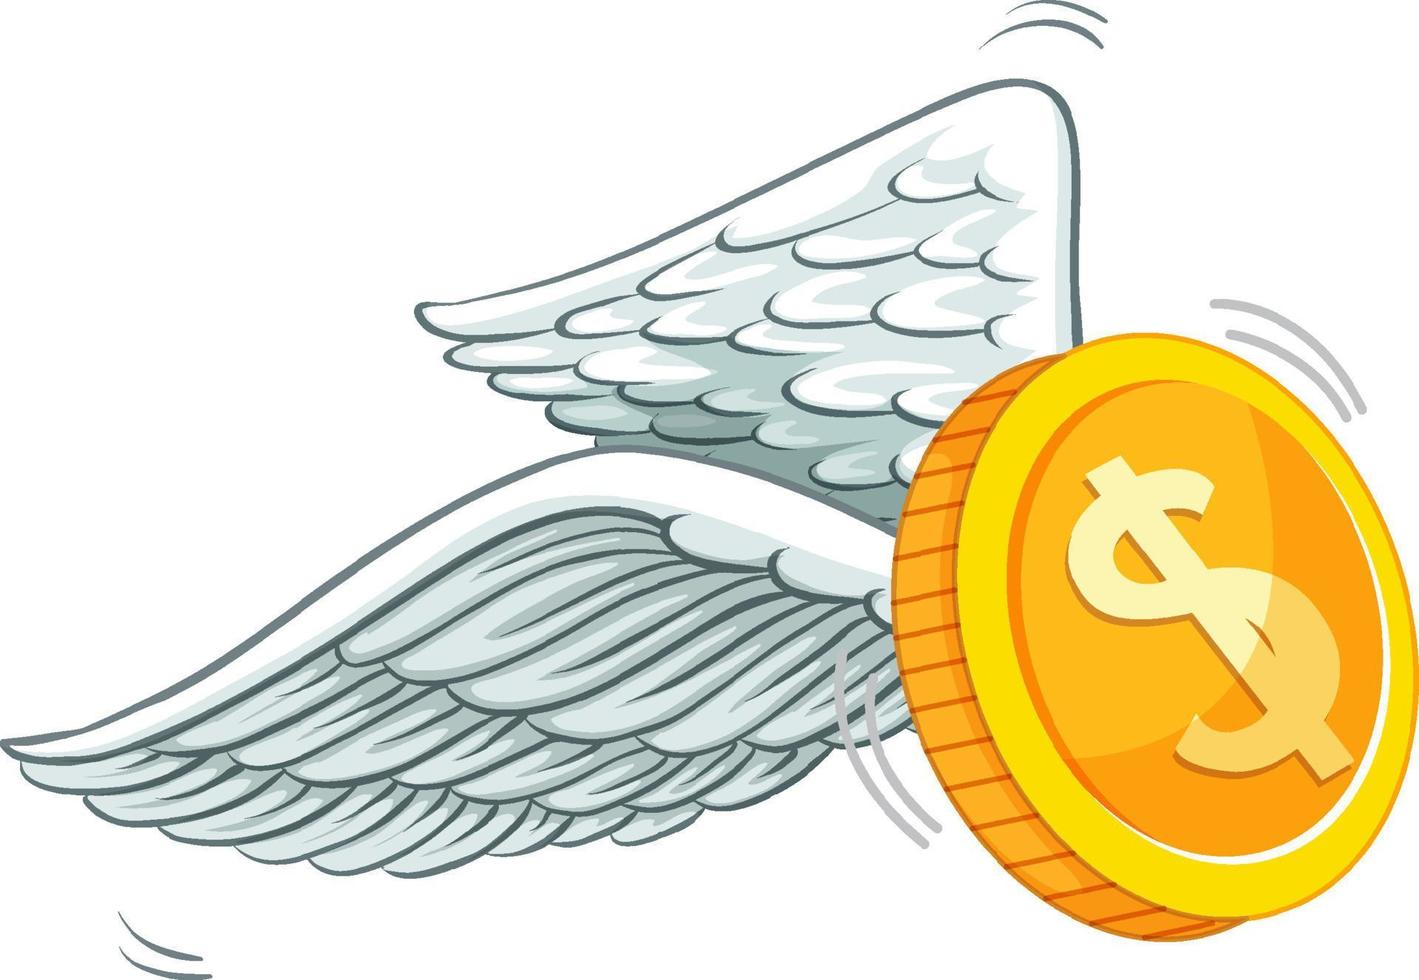 Gold coin with wings cartoon vector